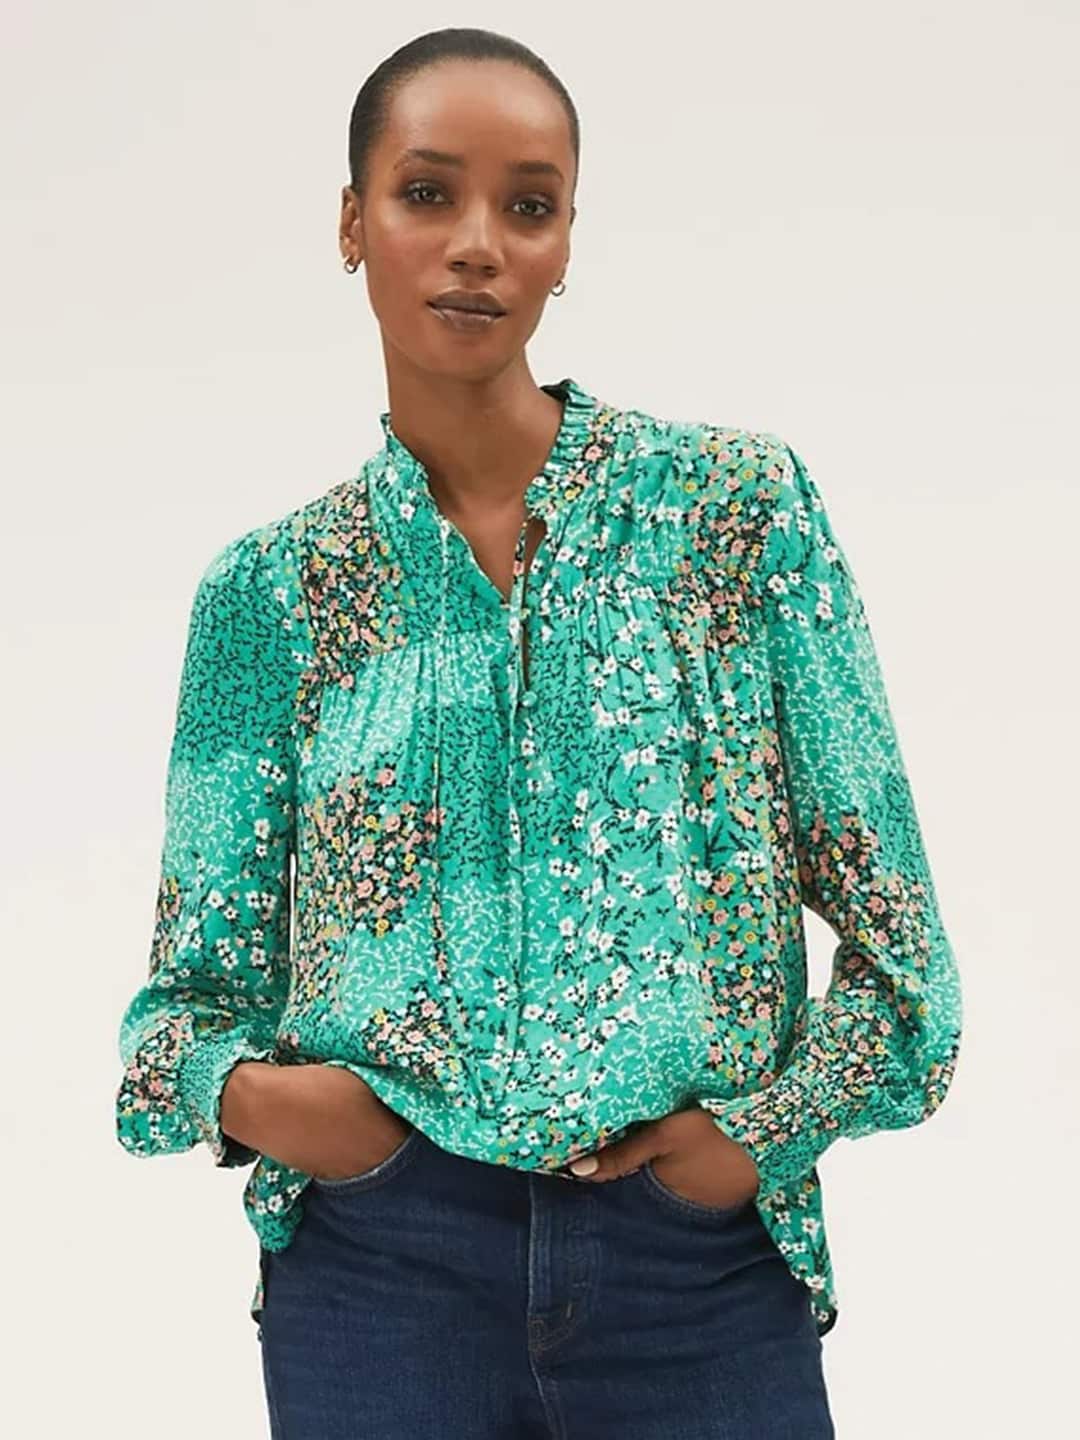 Marks & Spencer Green Floral Print Tie-Up Neck Shirt Style Top Price in India